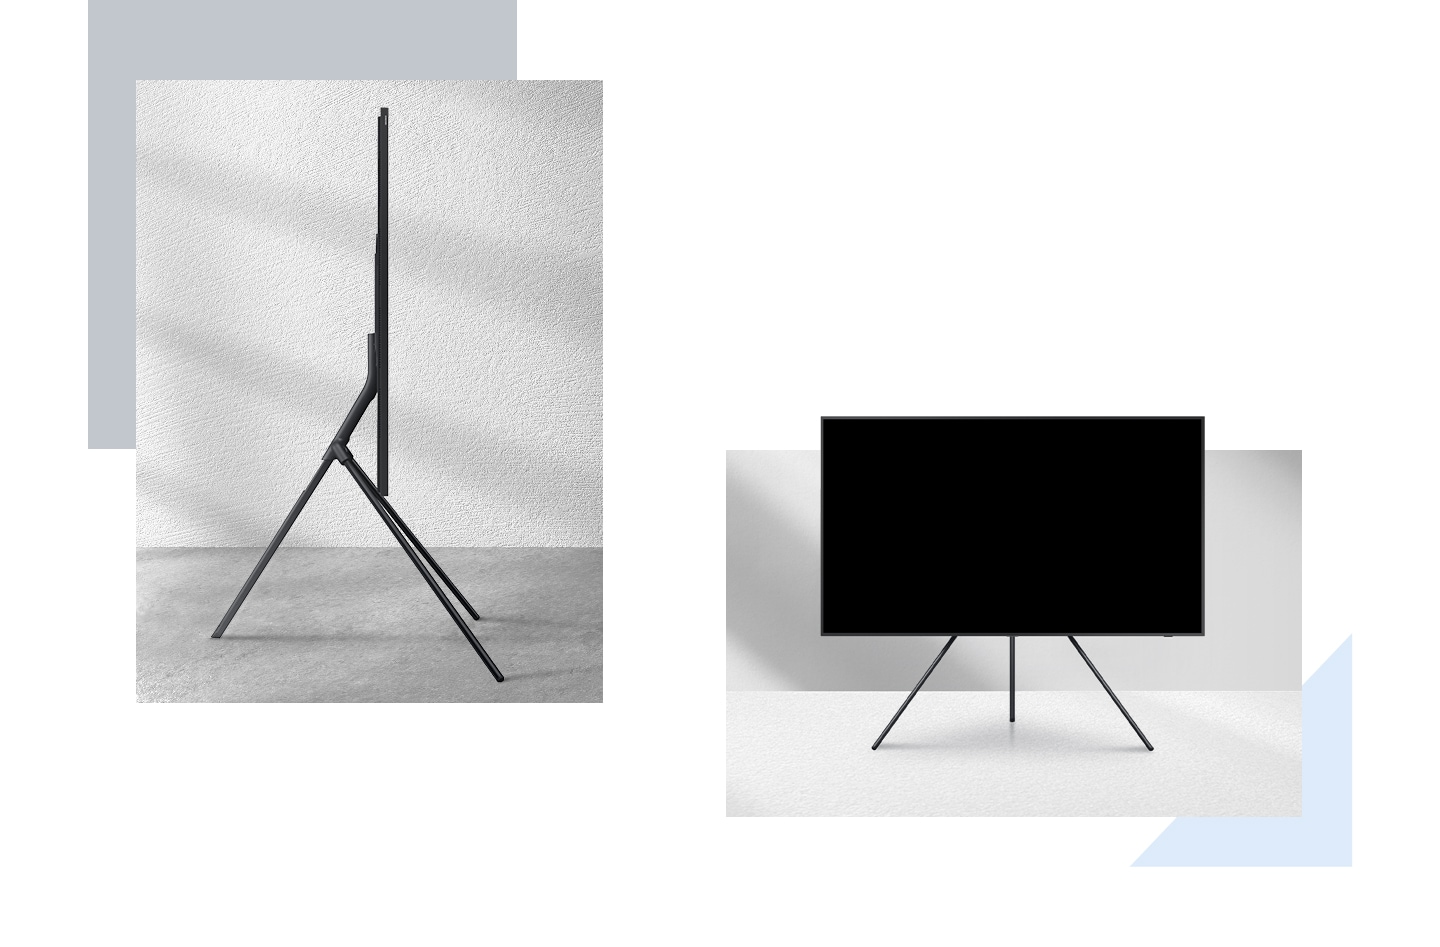 A Frame TV sits on a studio stand in a simple white room, its profile angled to the front. Next to it is the same TV with its front angled forward.